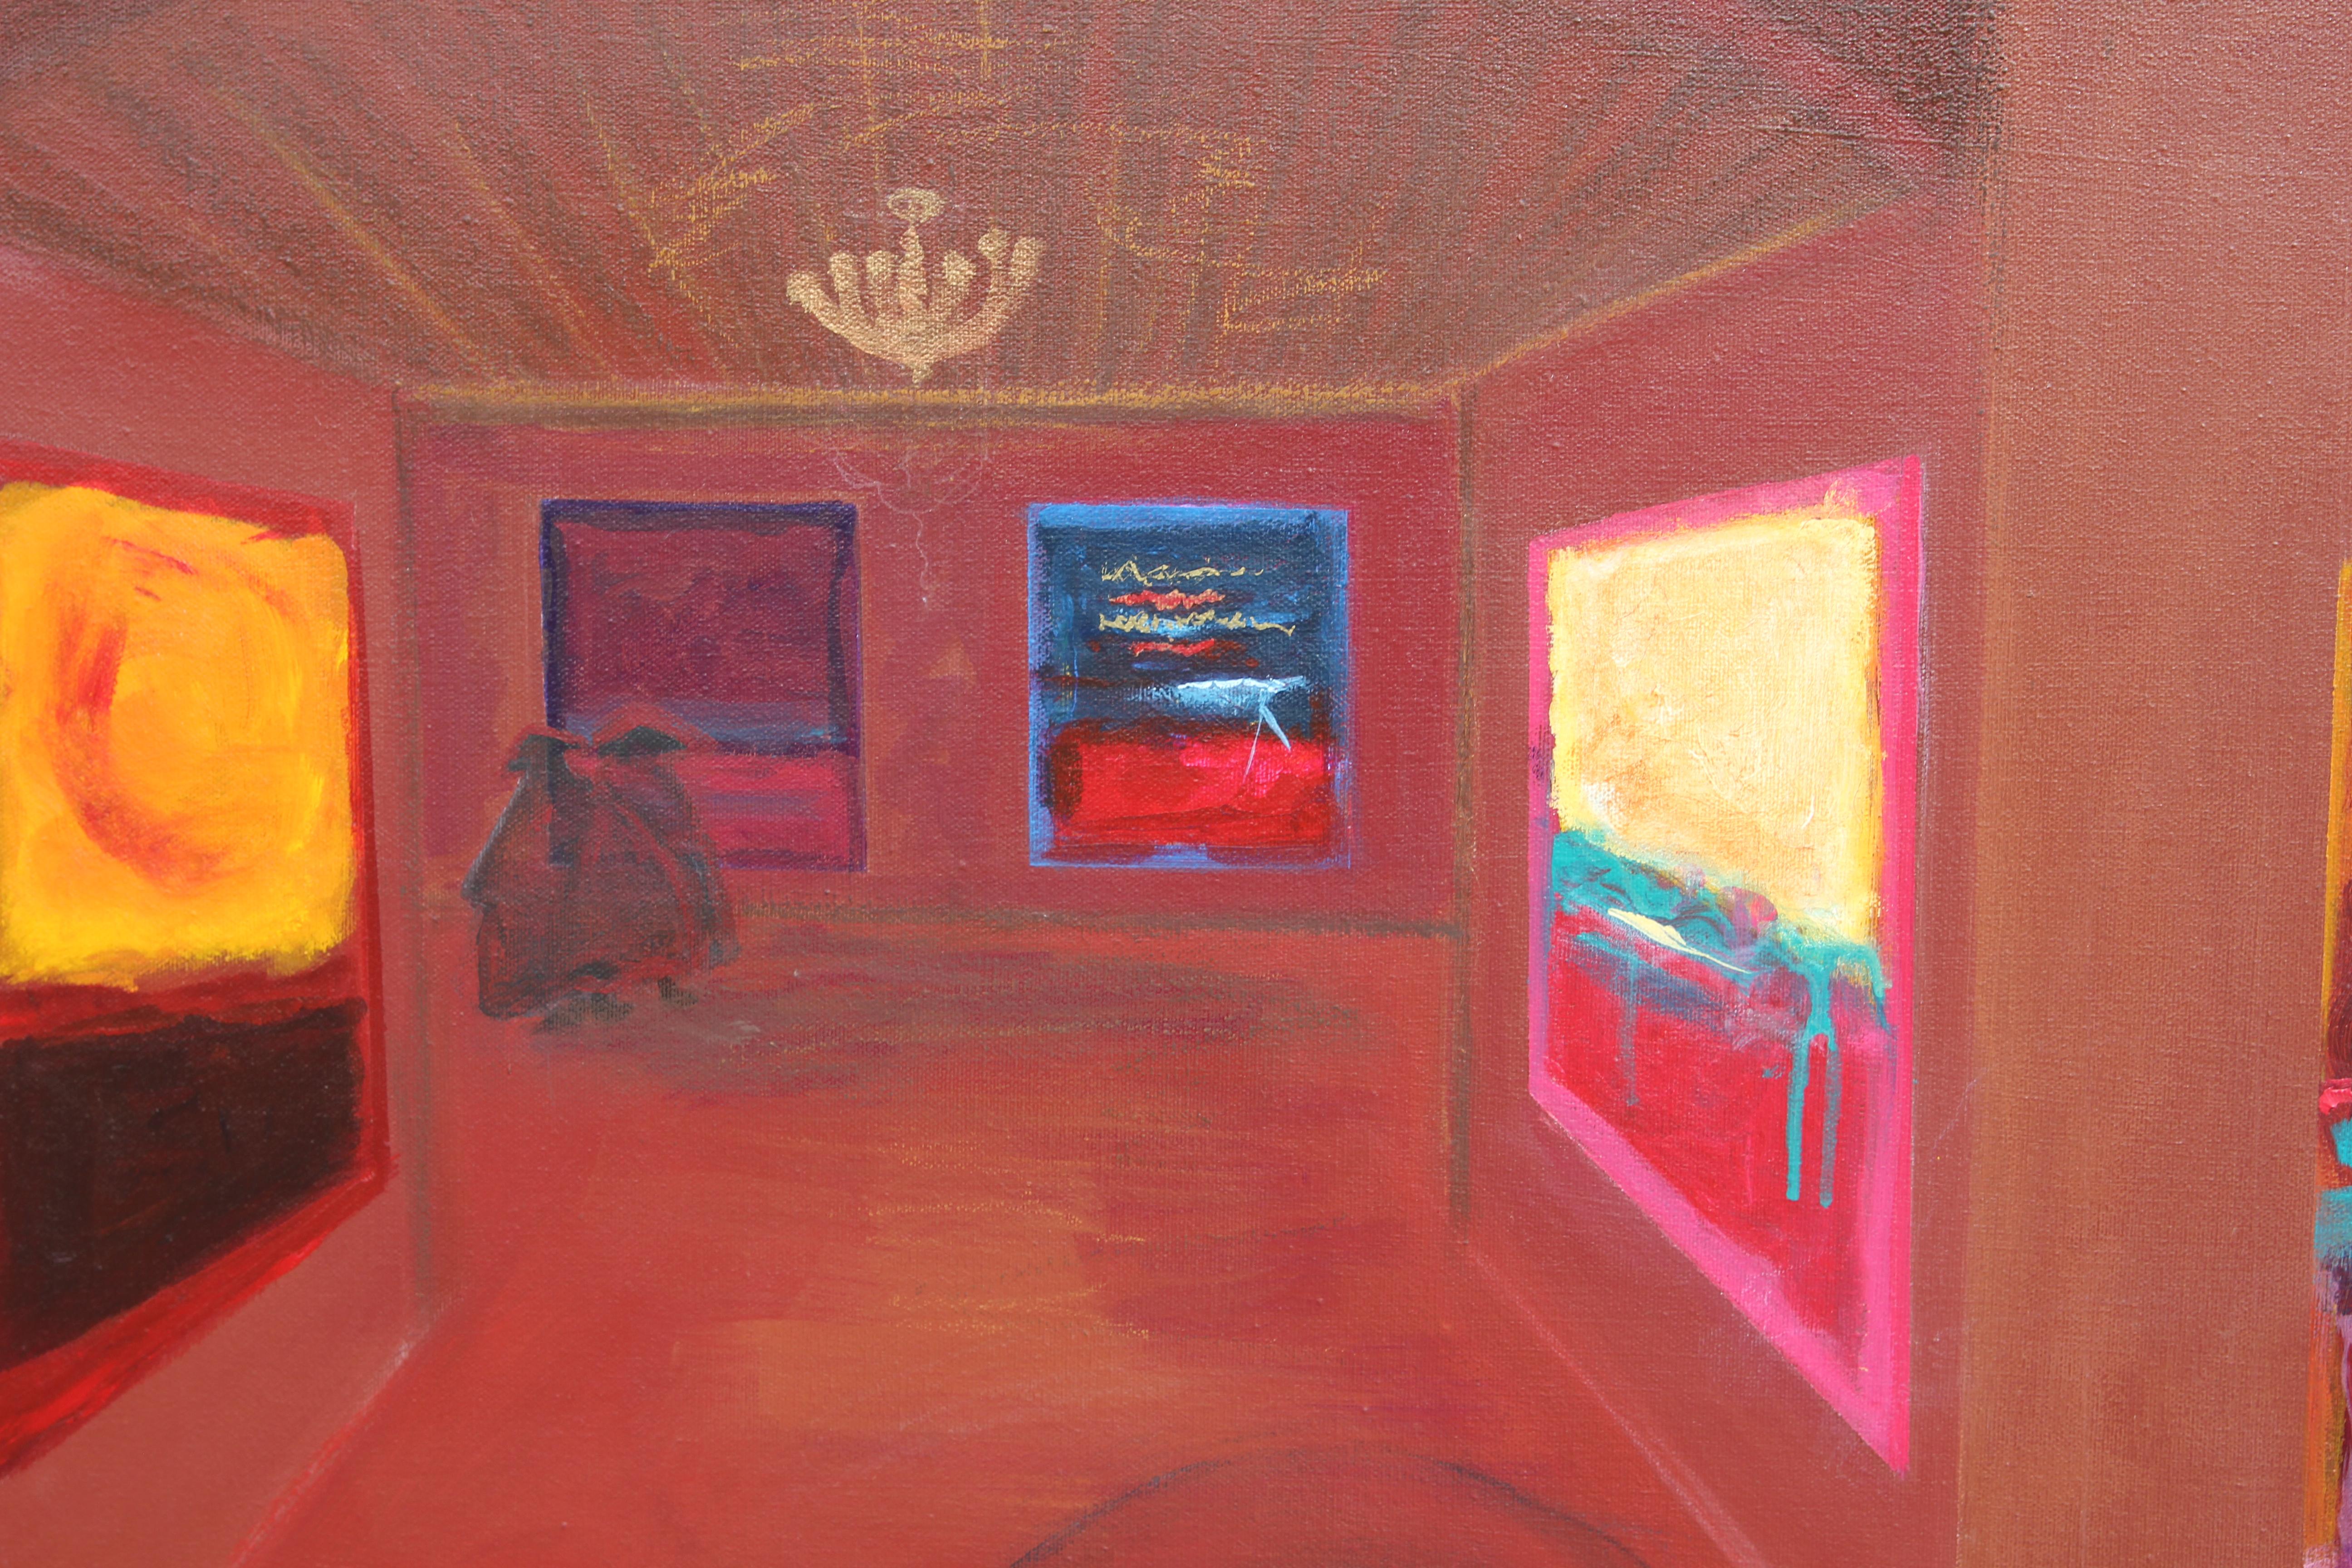 Large red toned gallery space of a selection of the artist's own work in the style of Mark Rothko's color field paintings. This piece is part of a series that the artist did exploring her own paintings in relation the galleries they were shown in.